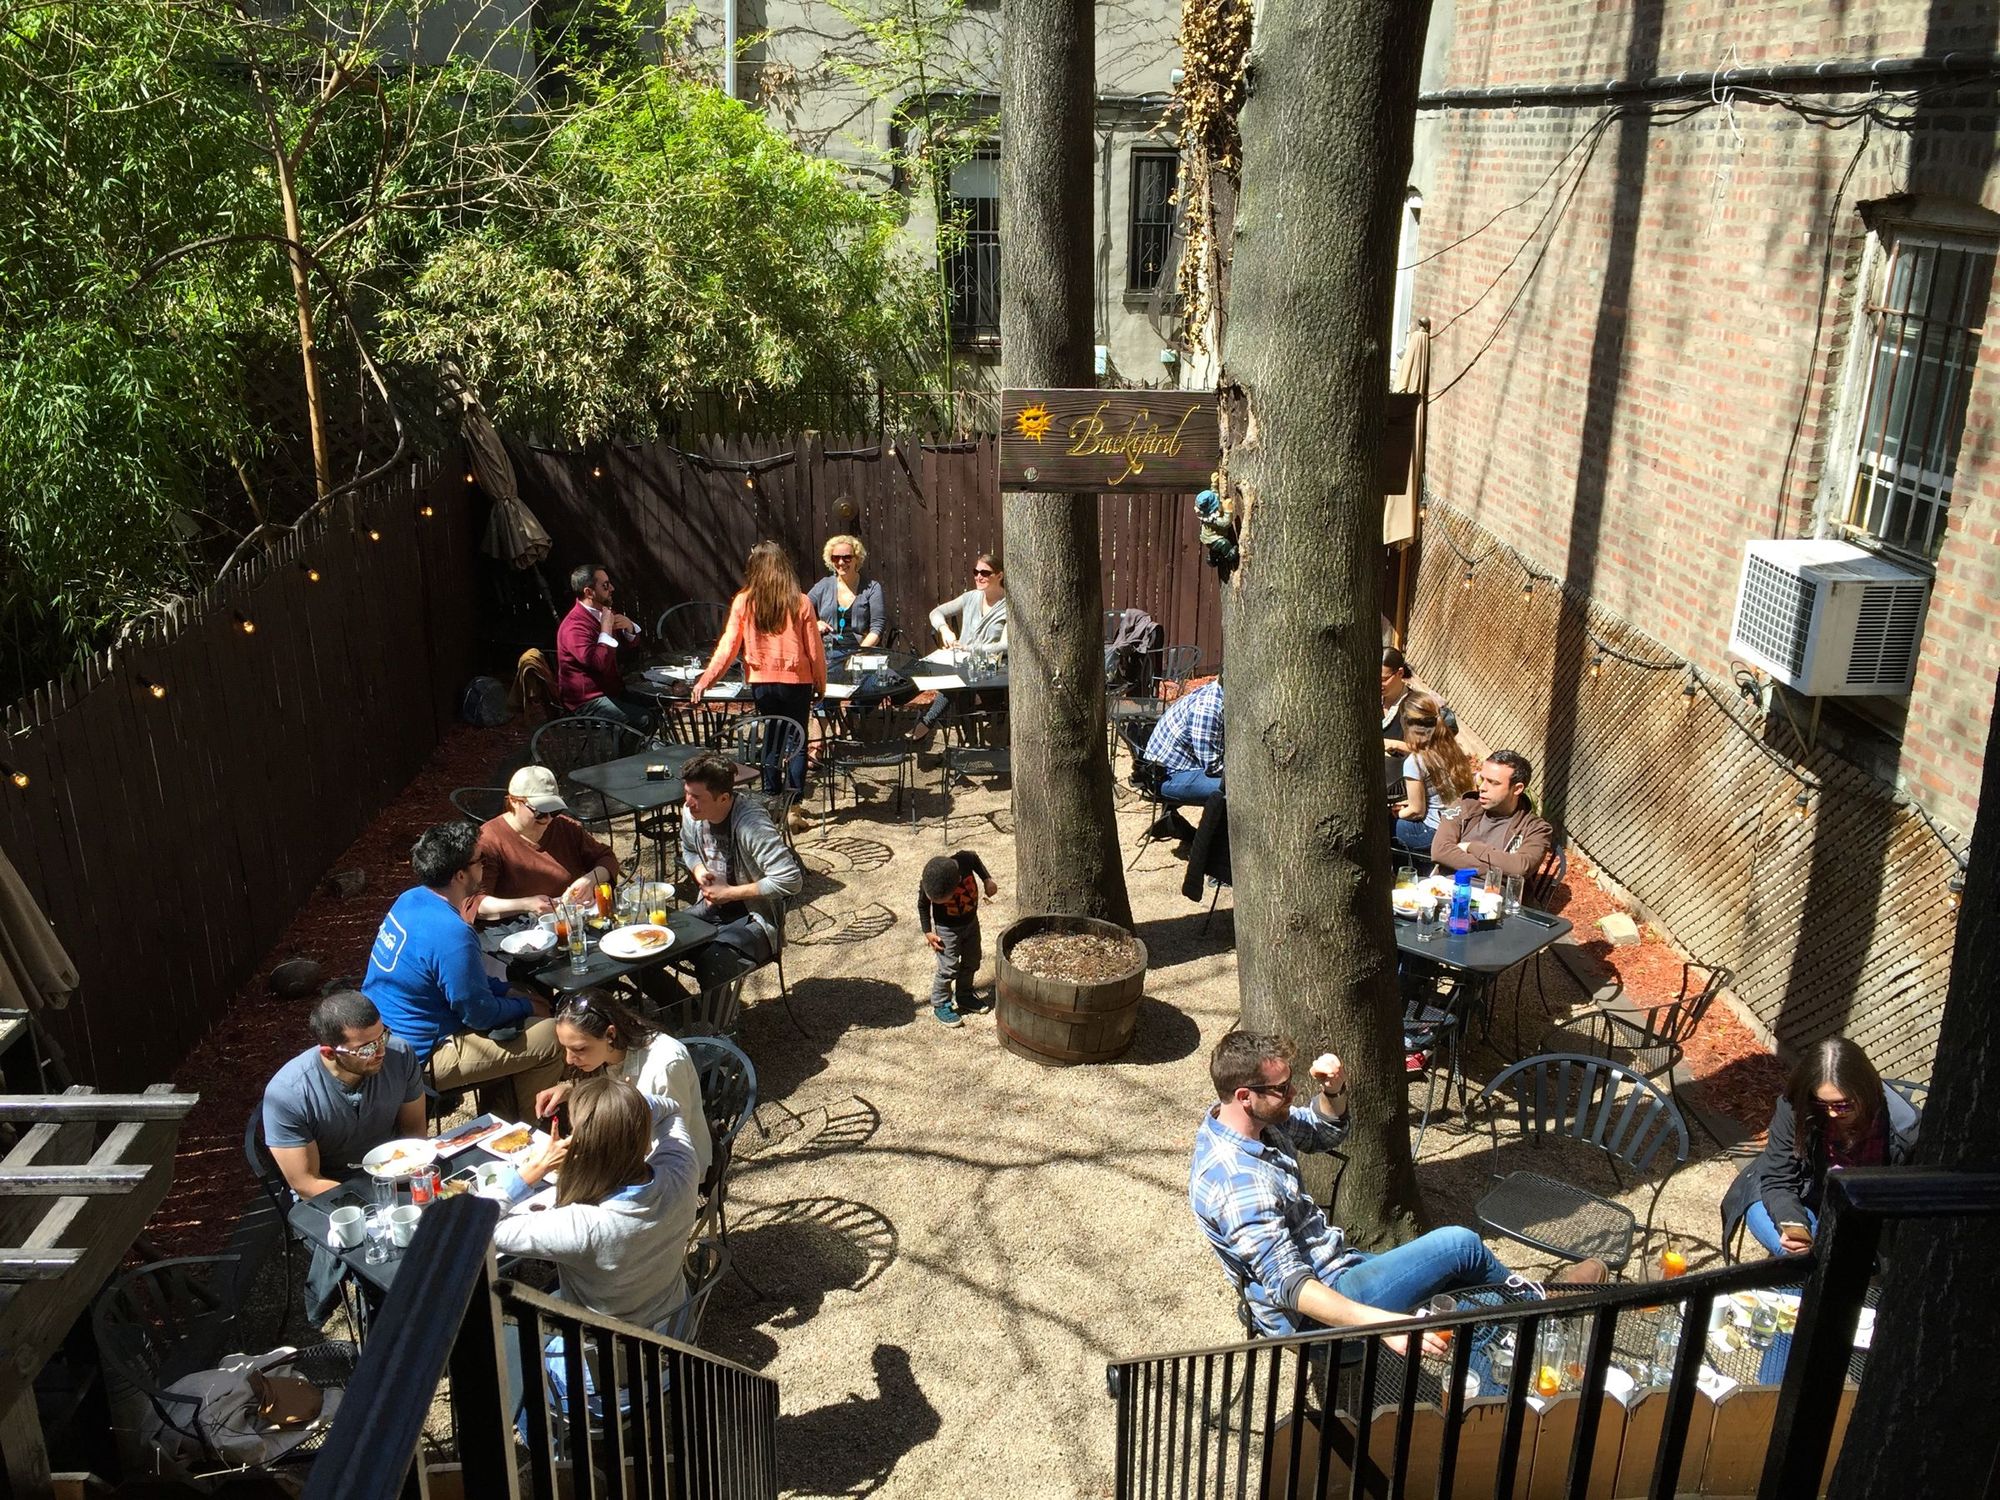 66 Outdoor Dining Options In Park Slope